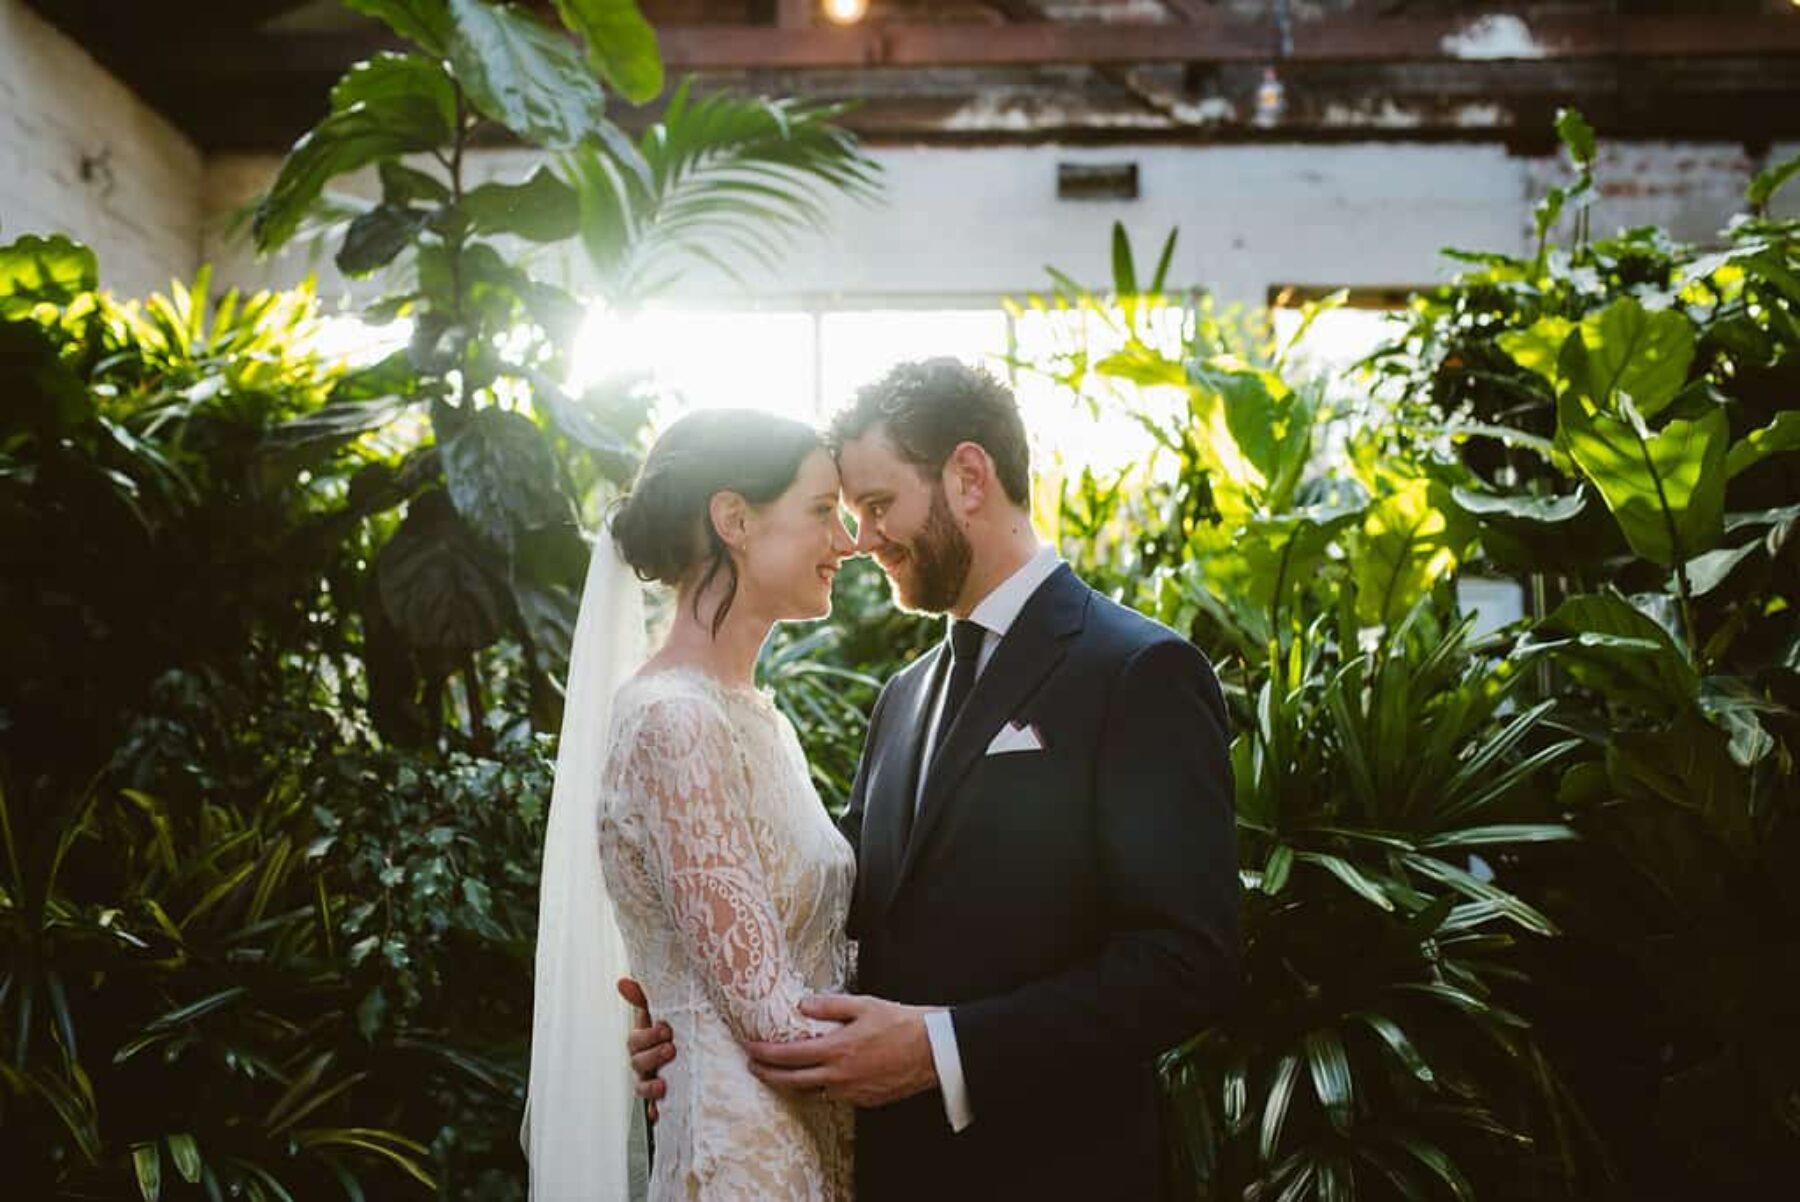 foliage-filled wedding at Melbourne's Glasshaus